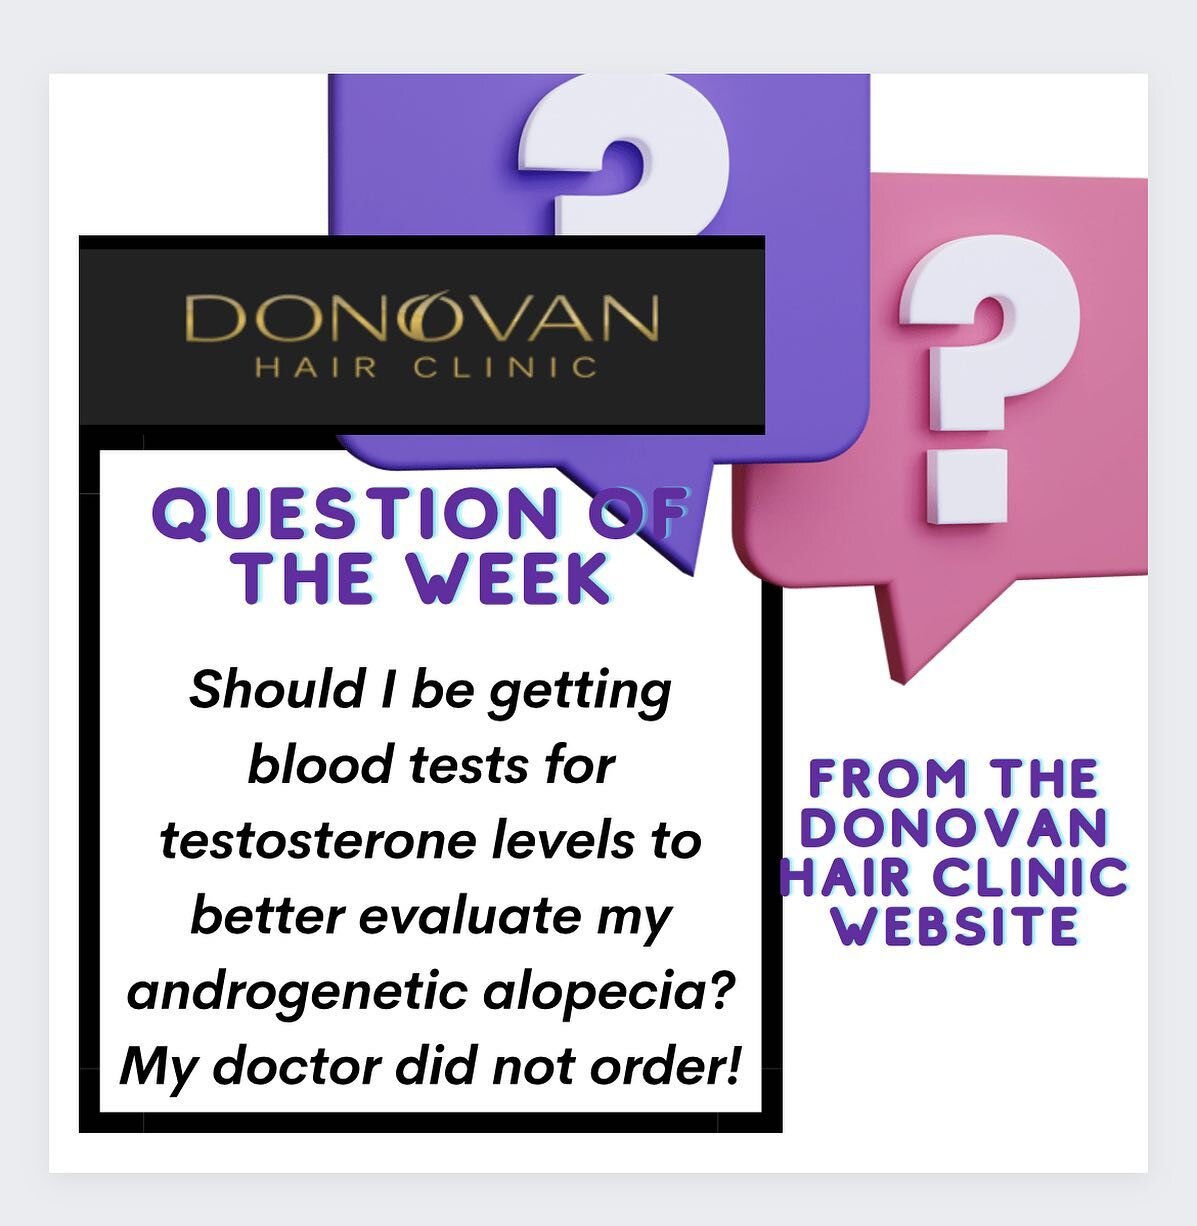 Each week I answer a series of great questions submitted through the Donovan Hair Clinic website. Here is our selection for this week. Full answer on the website under the &ldquo;Education tab.&rdquo;

This week I address an important topic related t